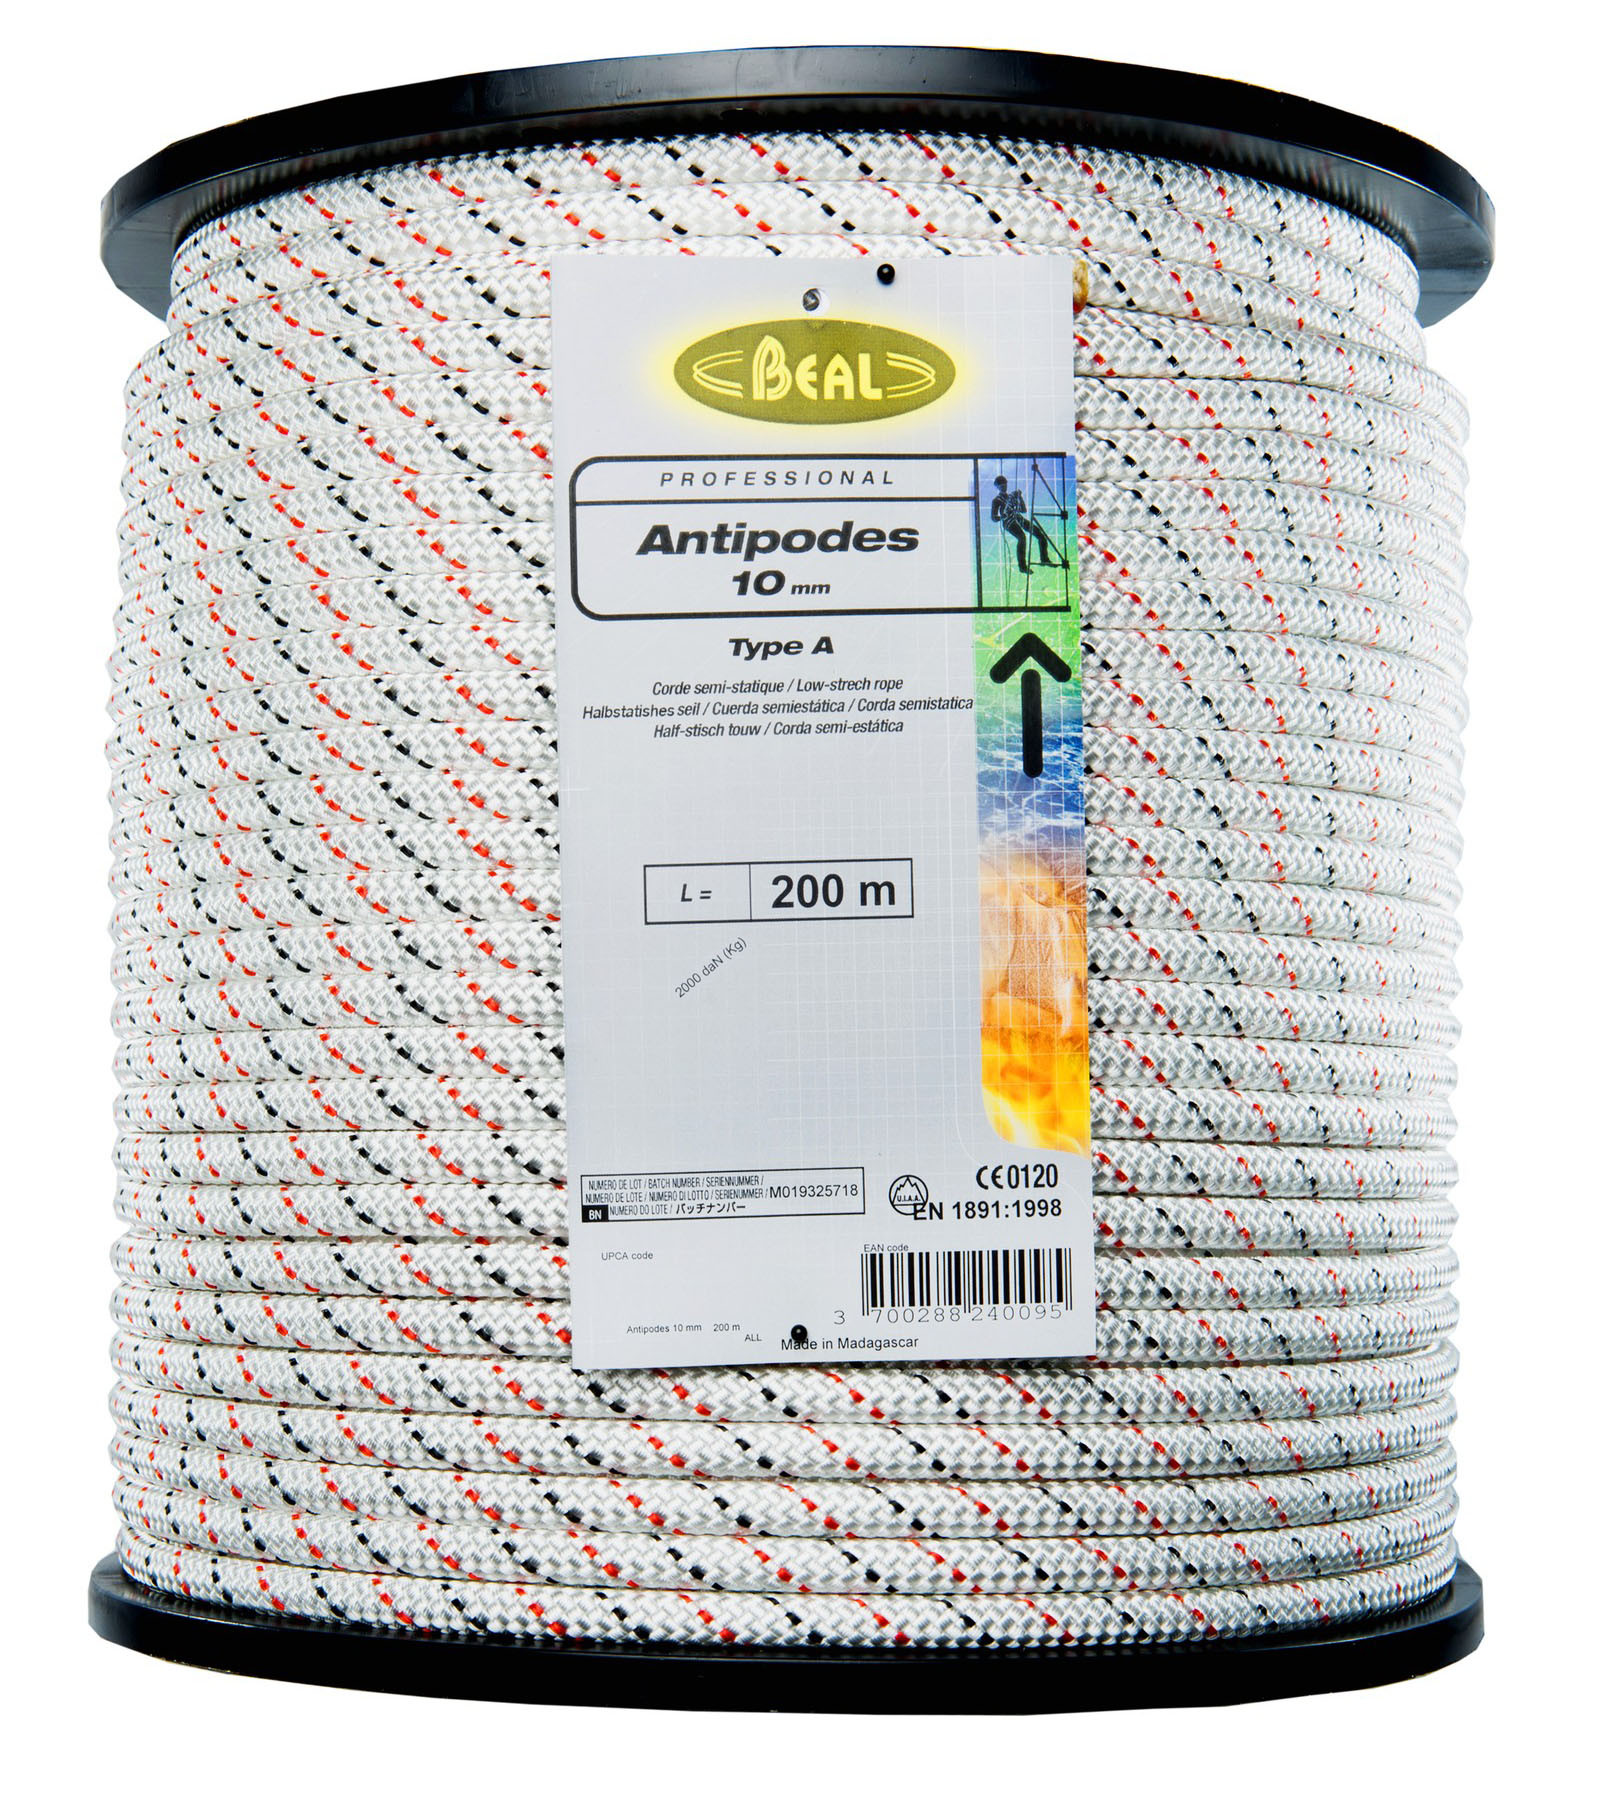 Beal Antipodes Rope 10 mm (200 Mtr pack)